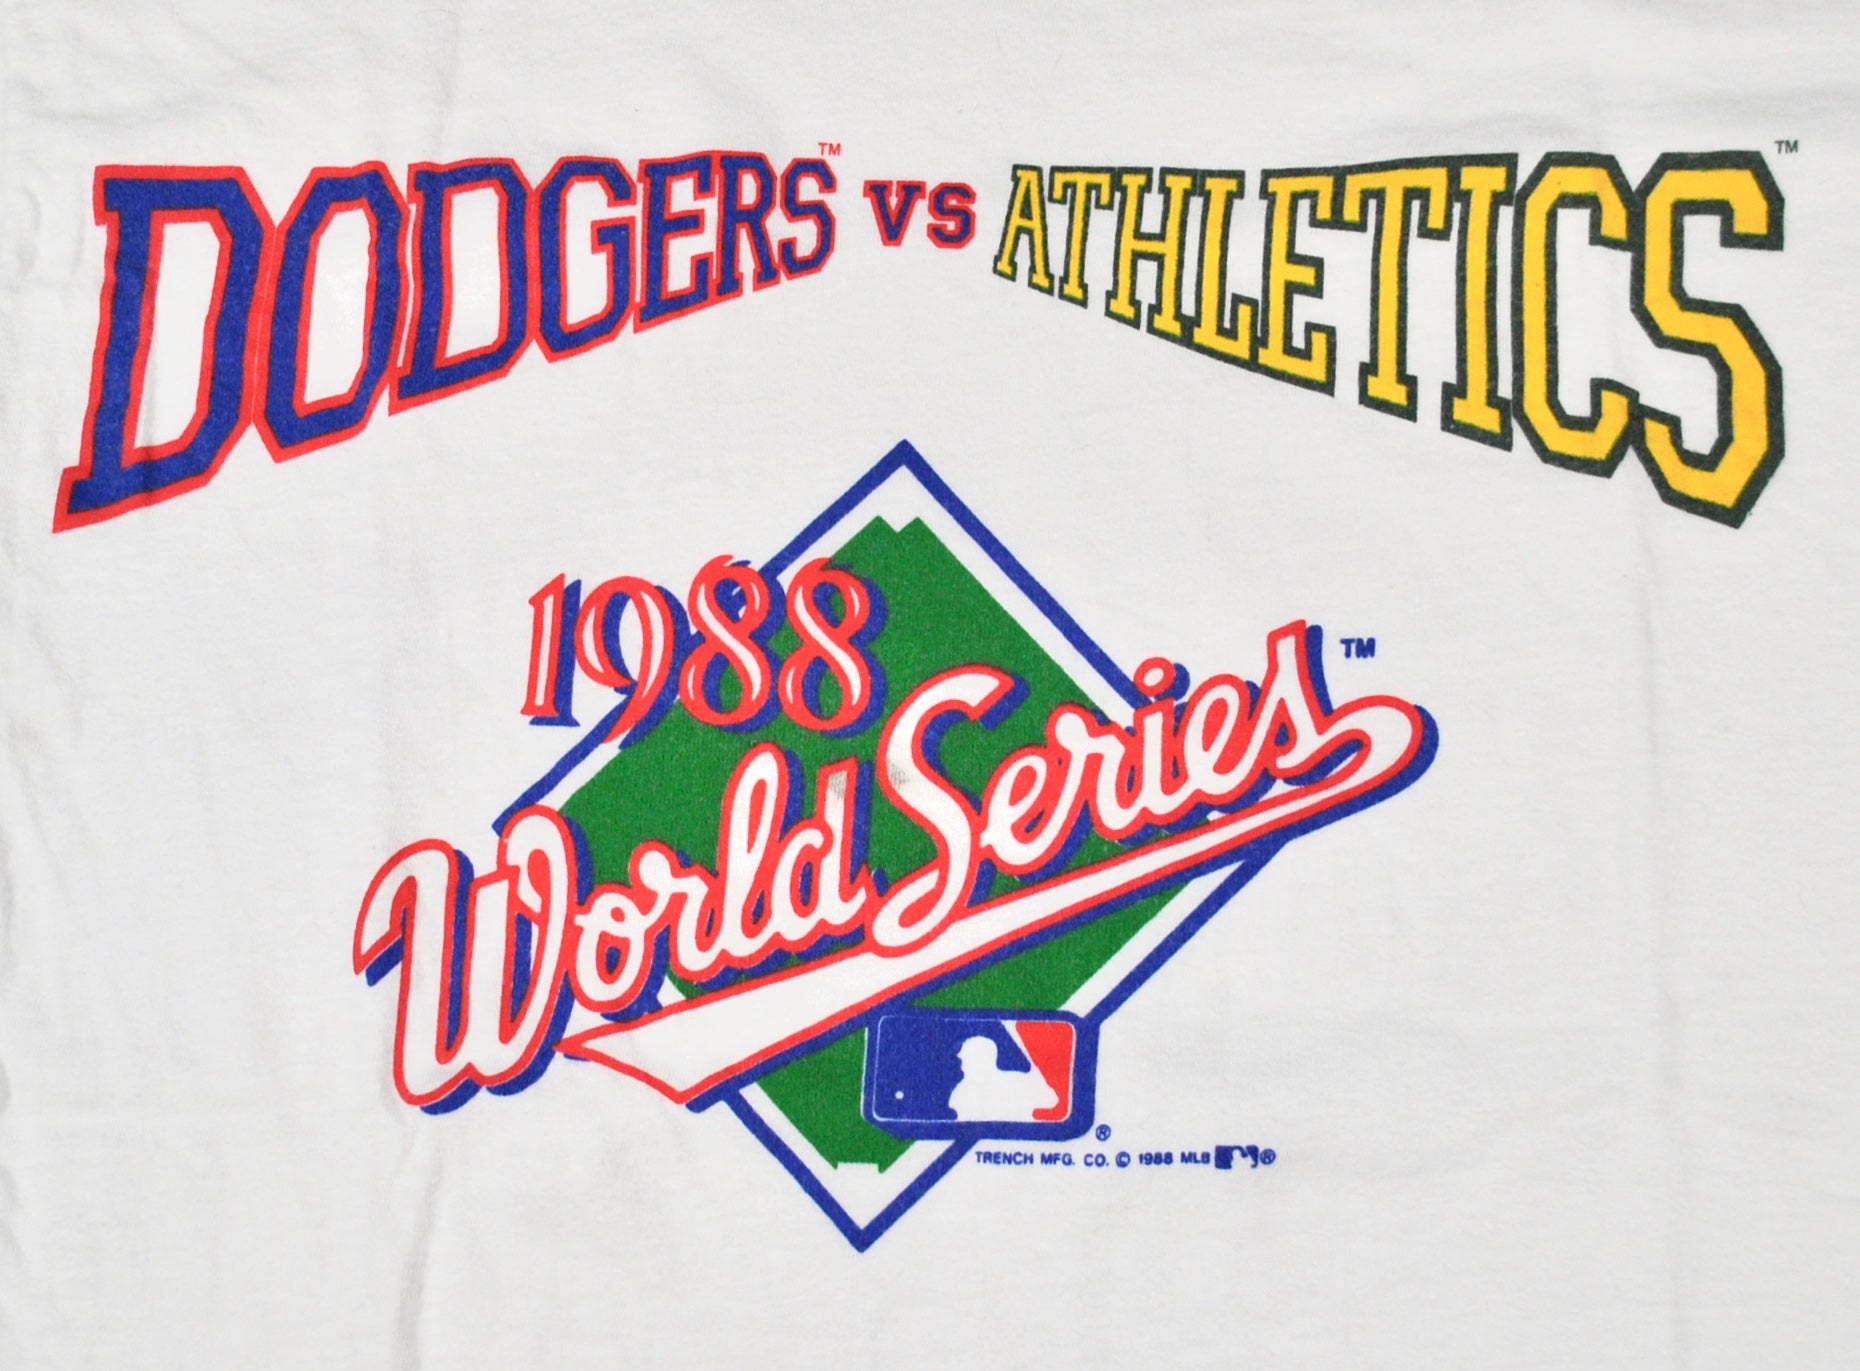 Sports / College Vintage MLB Los Angeles Dodgers World Champions Tee Shirt 1988 Large Made USA